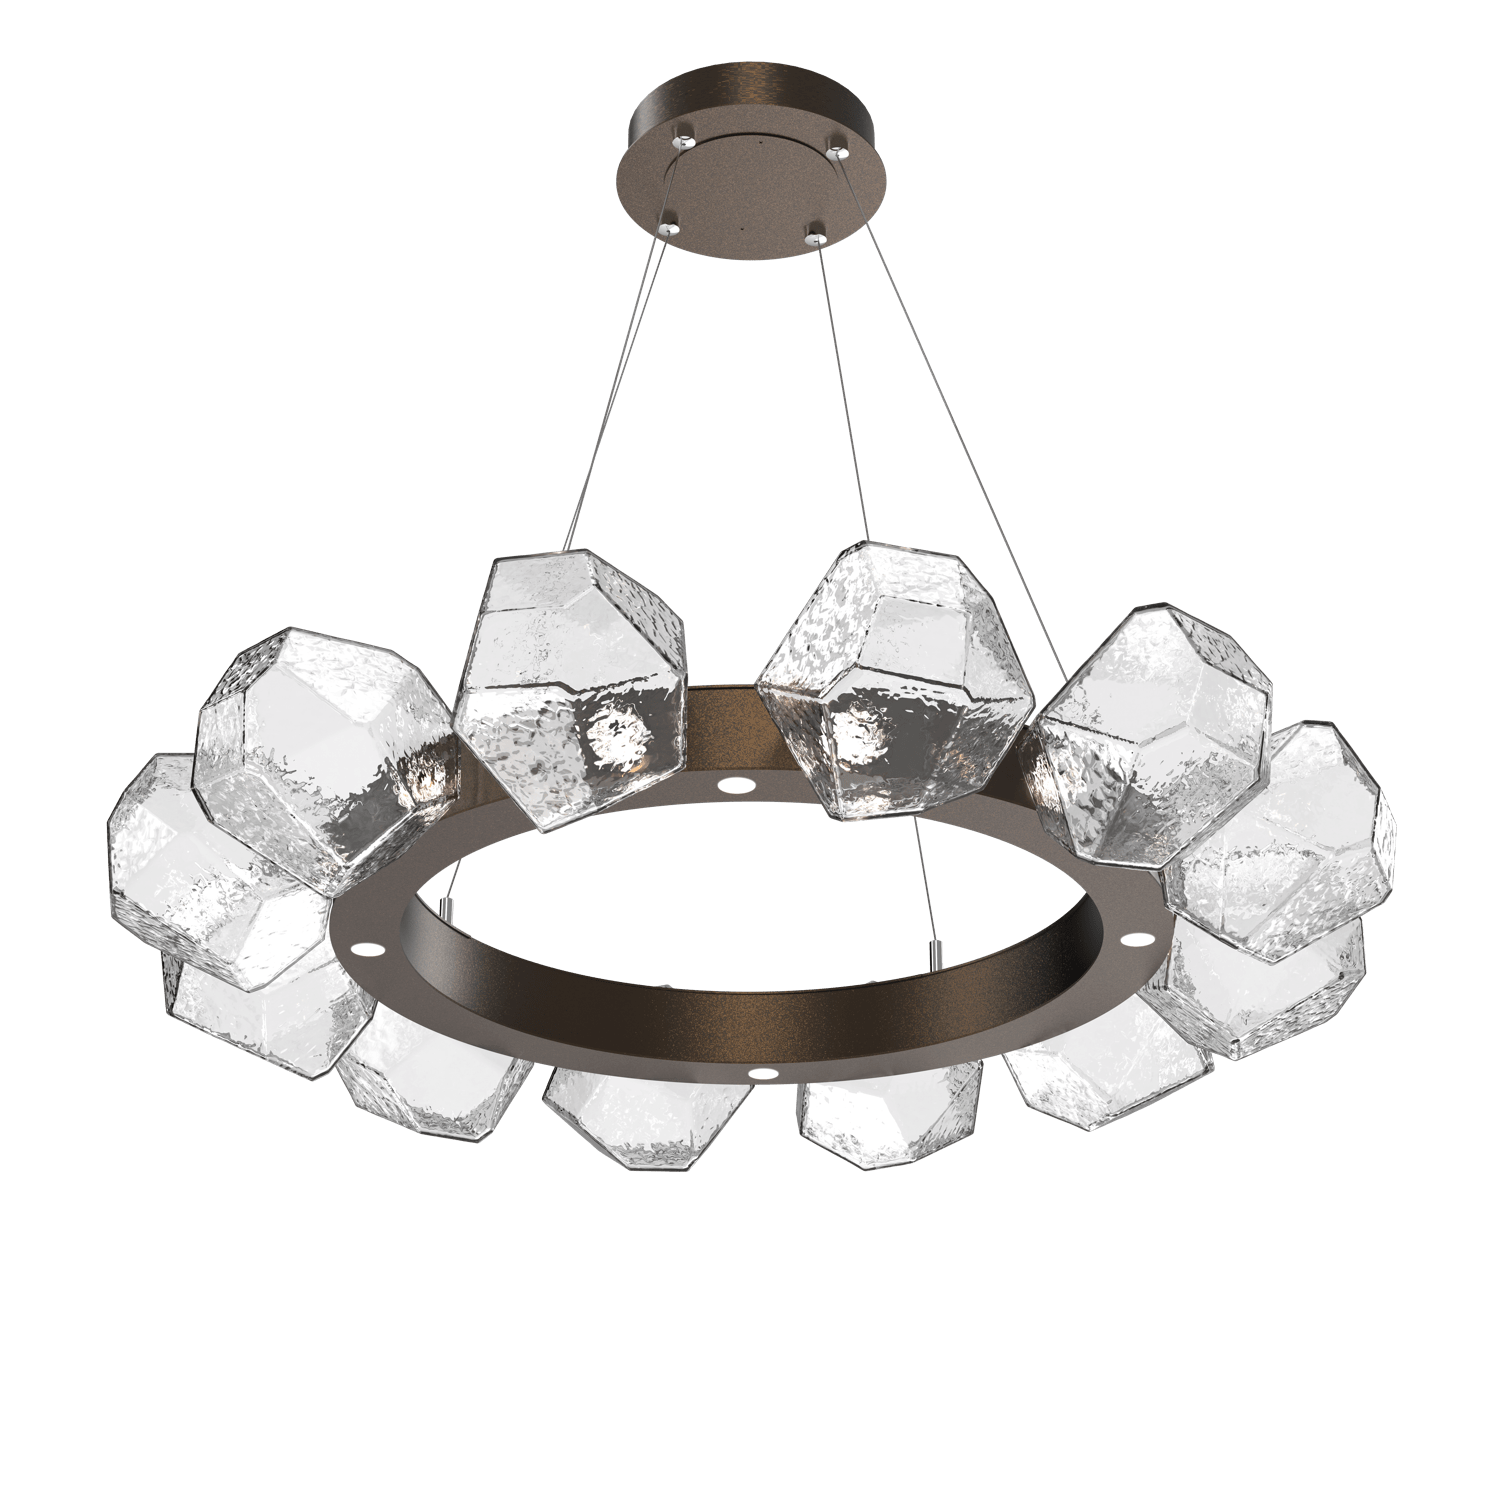 CHB0039-36-FB-C-Hammerton-Studio-Gem-36-inch-radial-ring-chandelier-with-flat-bronze-finish-and-clear-blown-glass-shades-and-LED-lamping